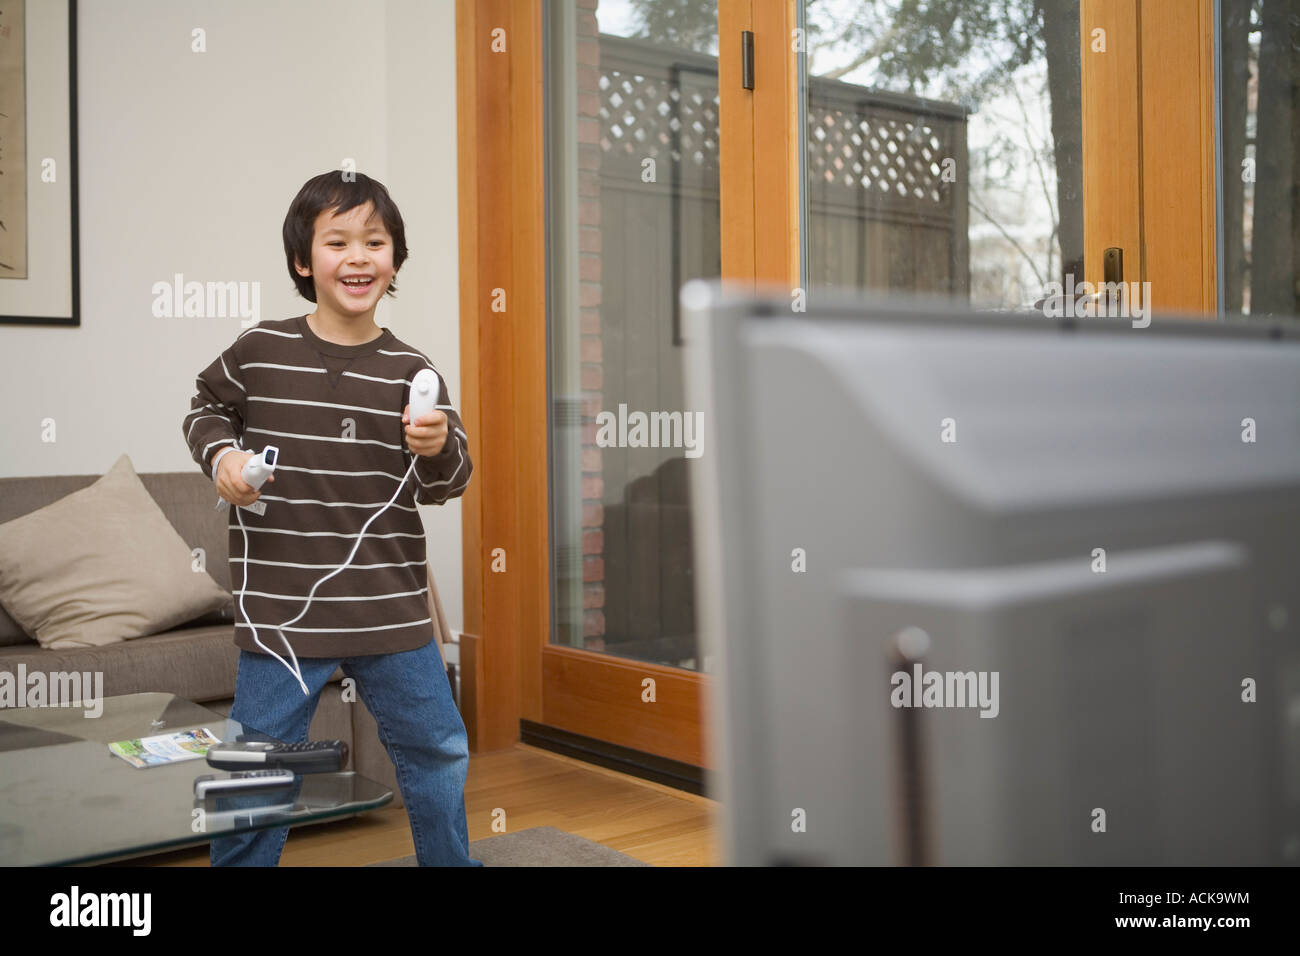 Little boy having a blast of fun, playing with the popular wireless video game Nintendo Wii. Model Released Stock Photo